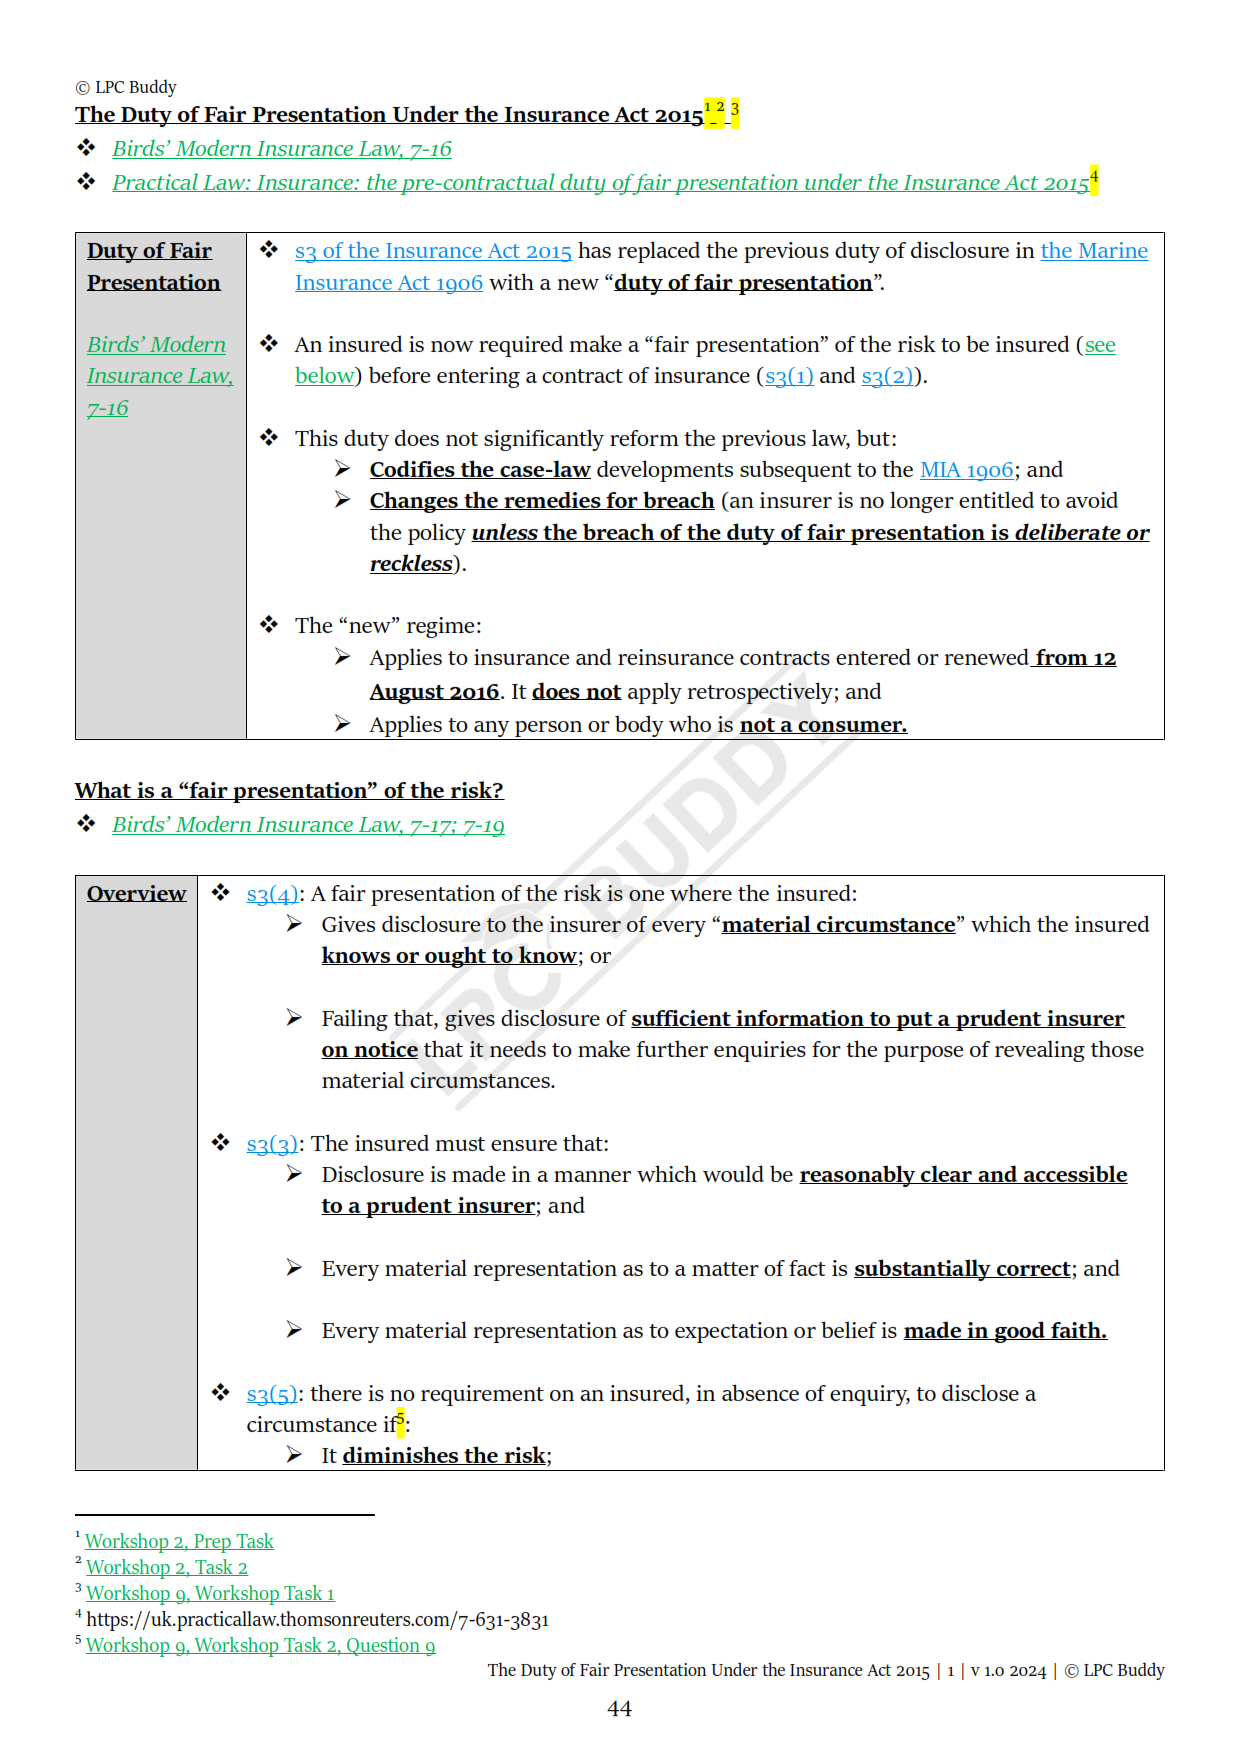 LPC Buddy™ 2024 | Insurance Law | Distinction Level Study Guide for the LPC (Electronic)